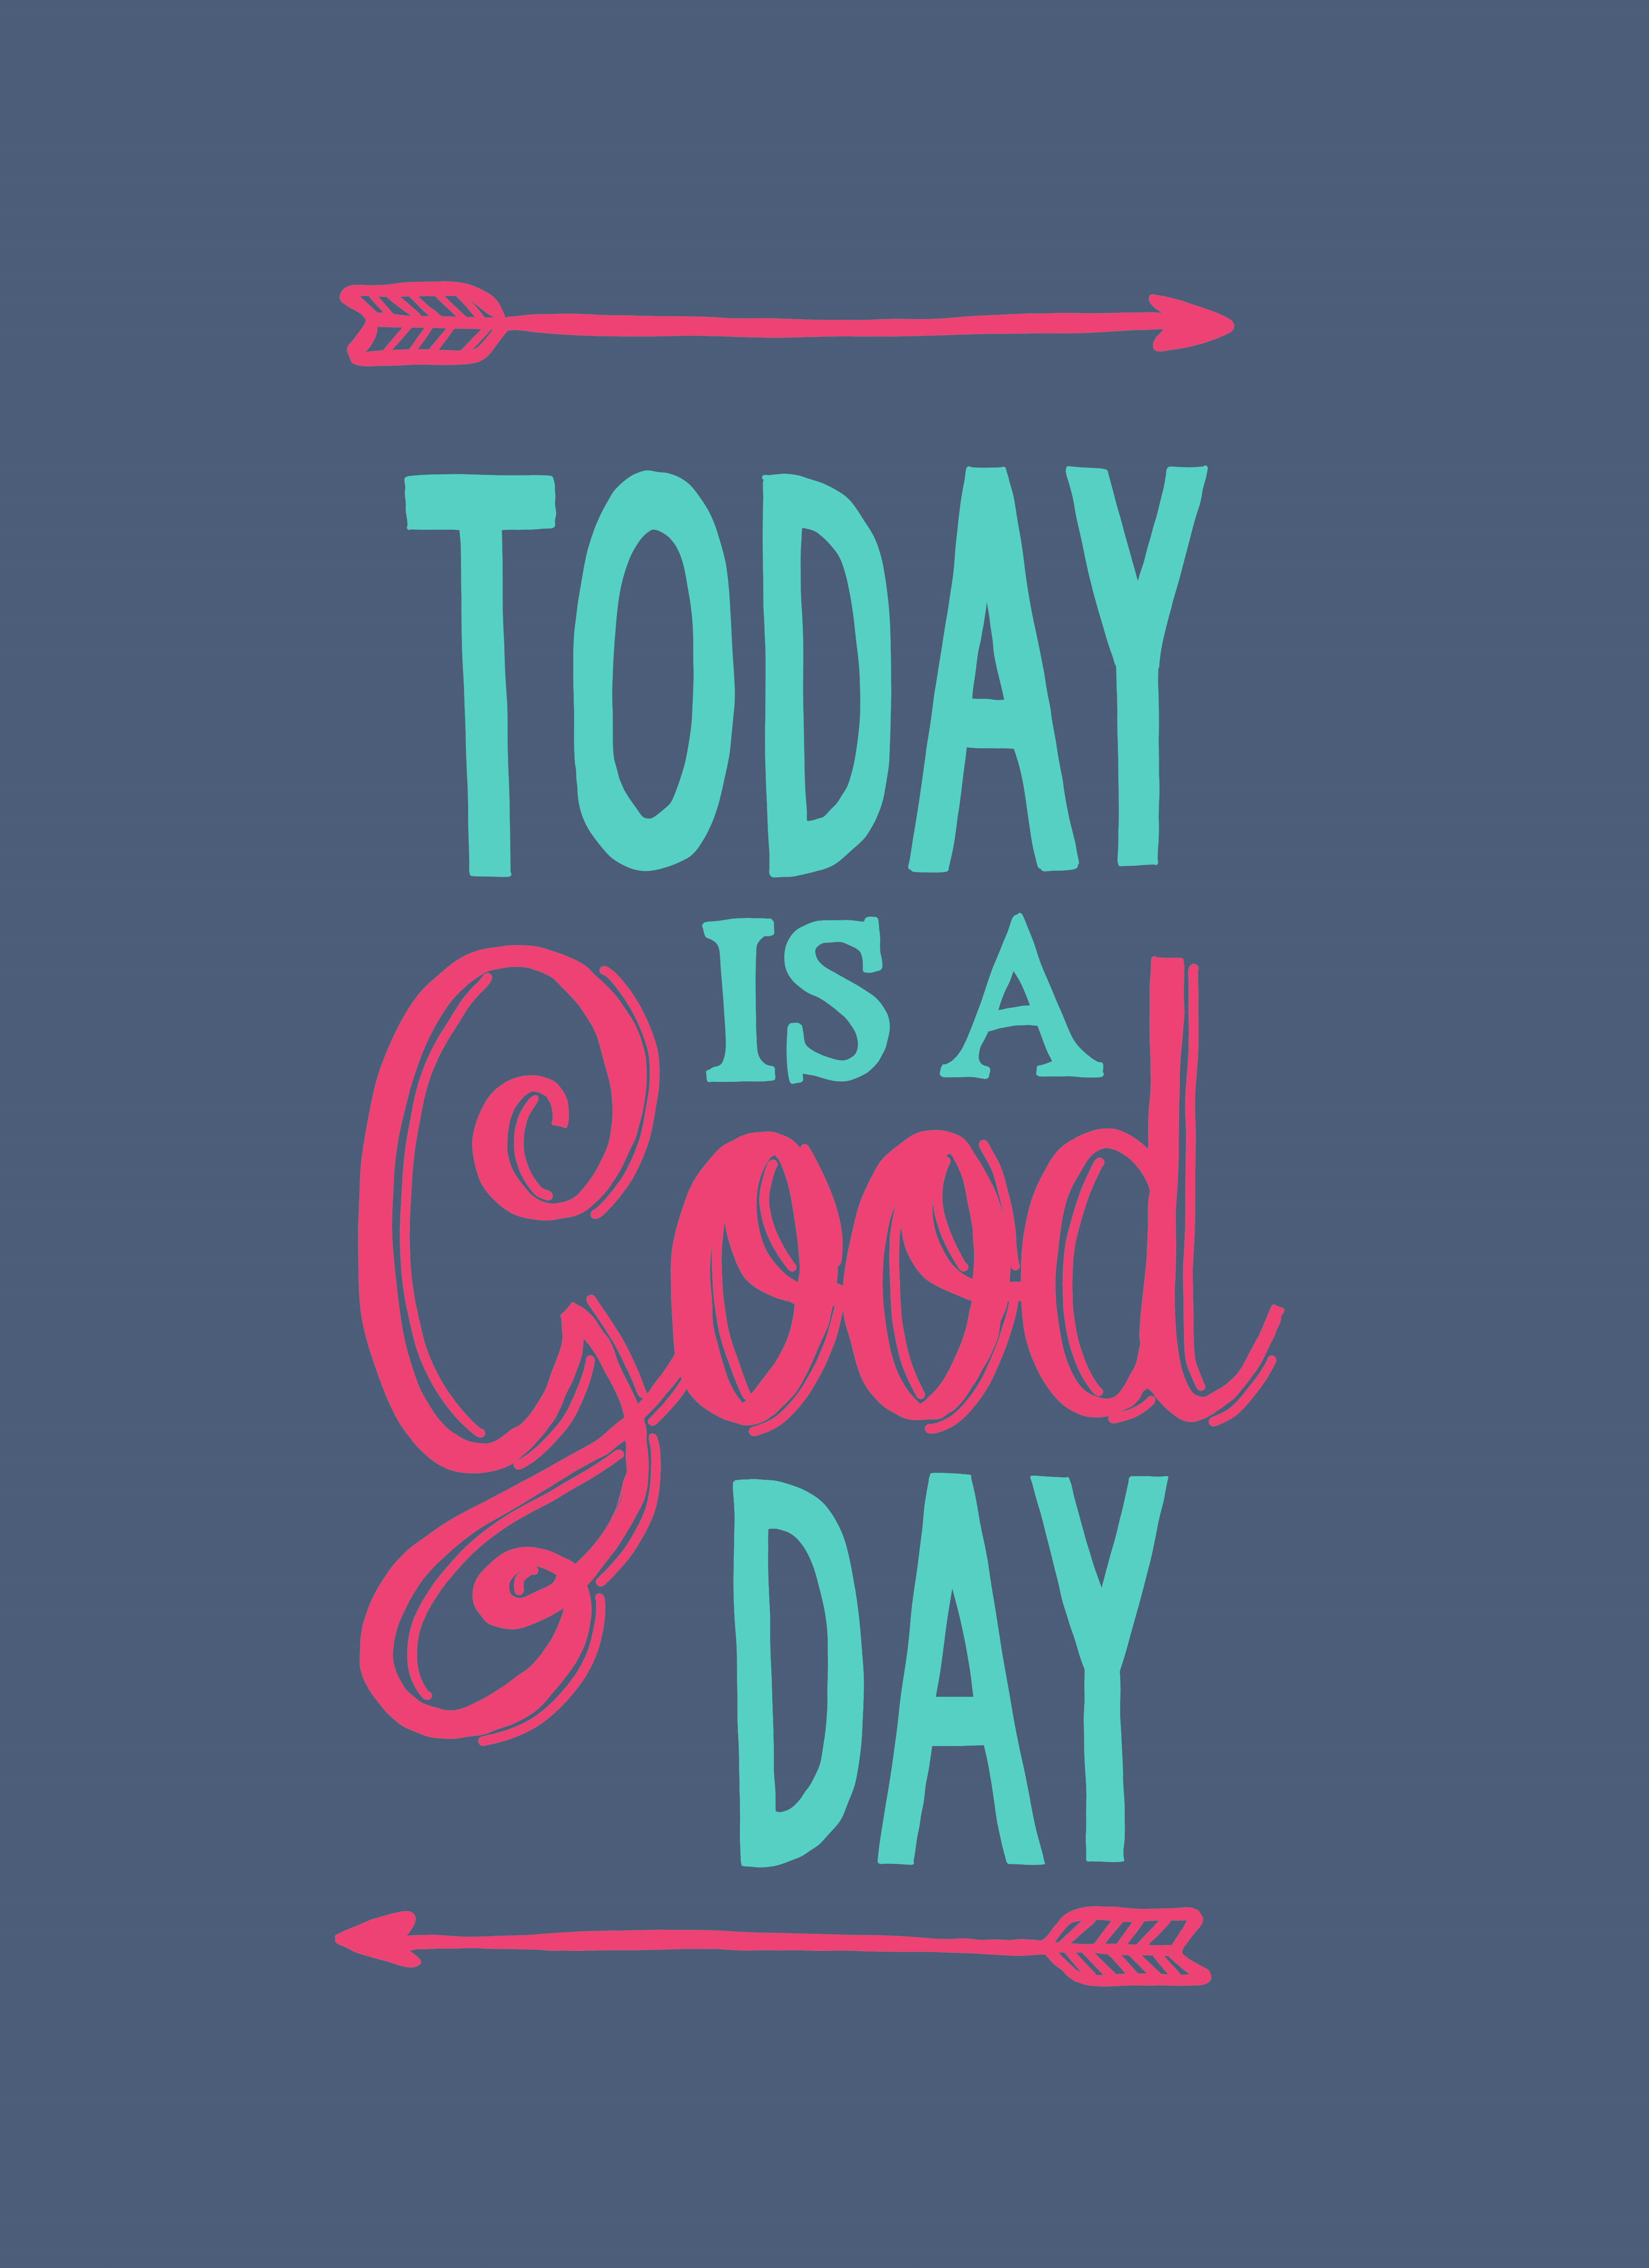 Today is a Good Day! animation design graphic design illustration